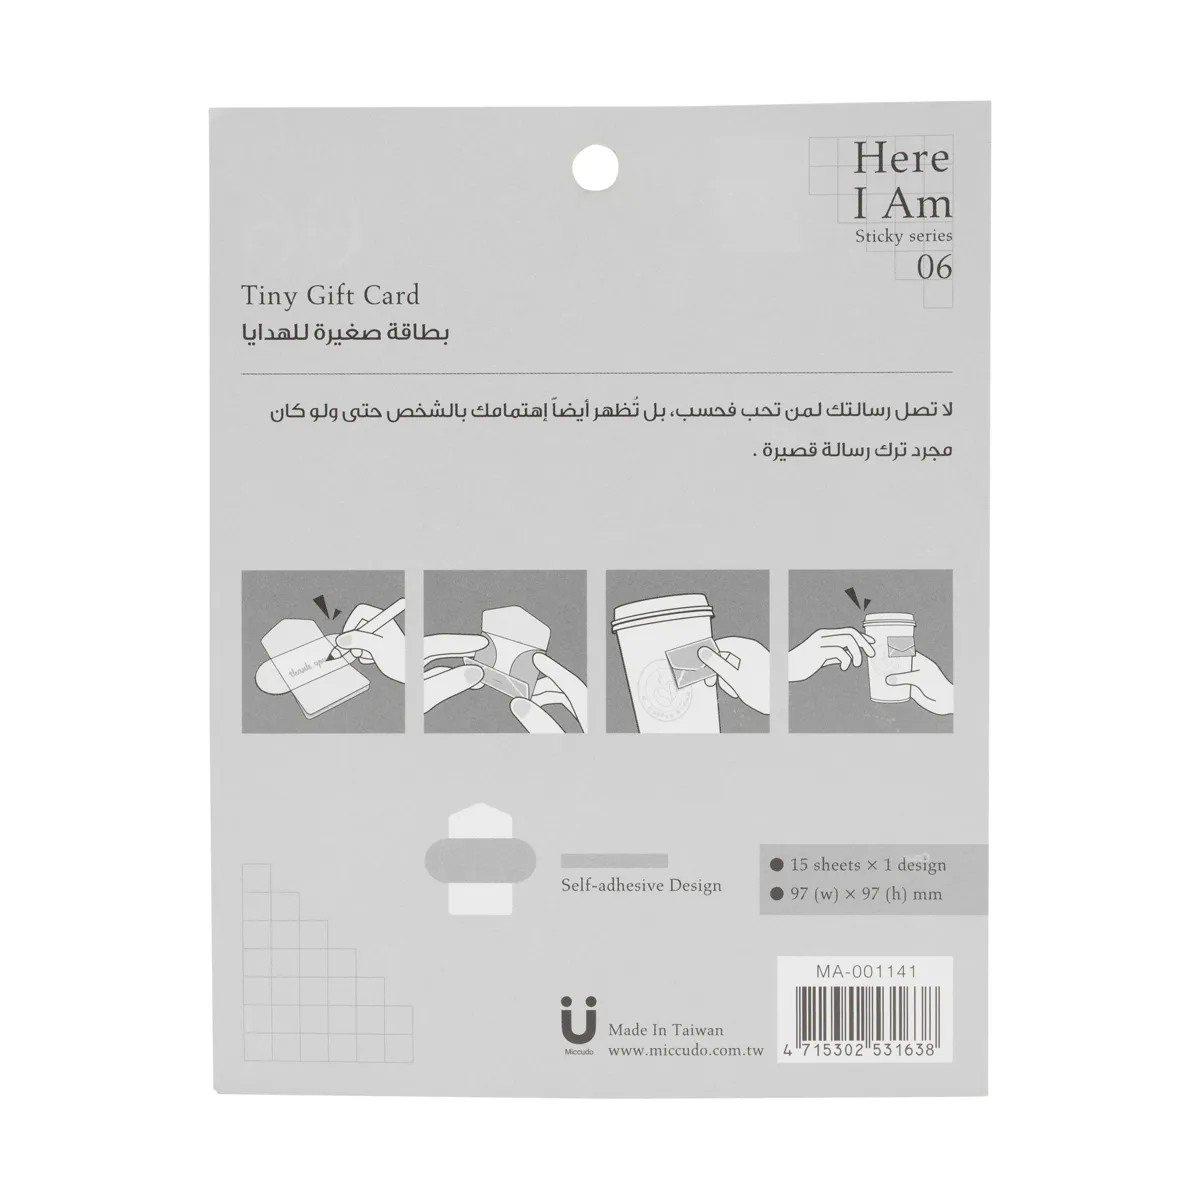 Here I Am Tiny Gift Card Sticky Air Mail